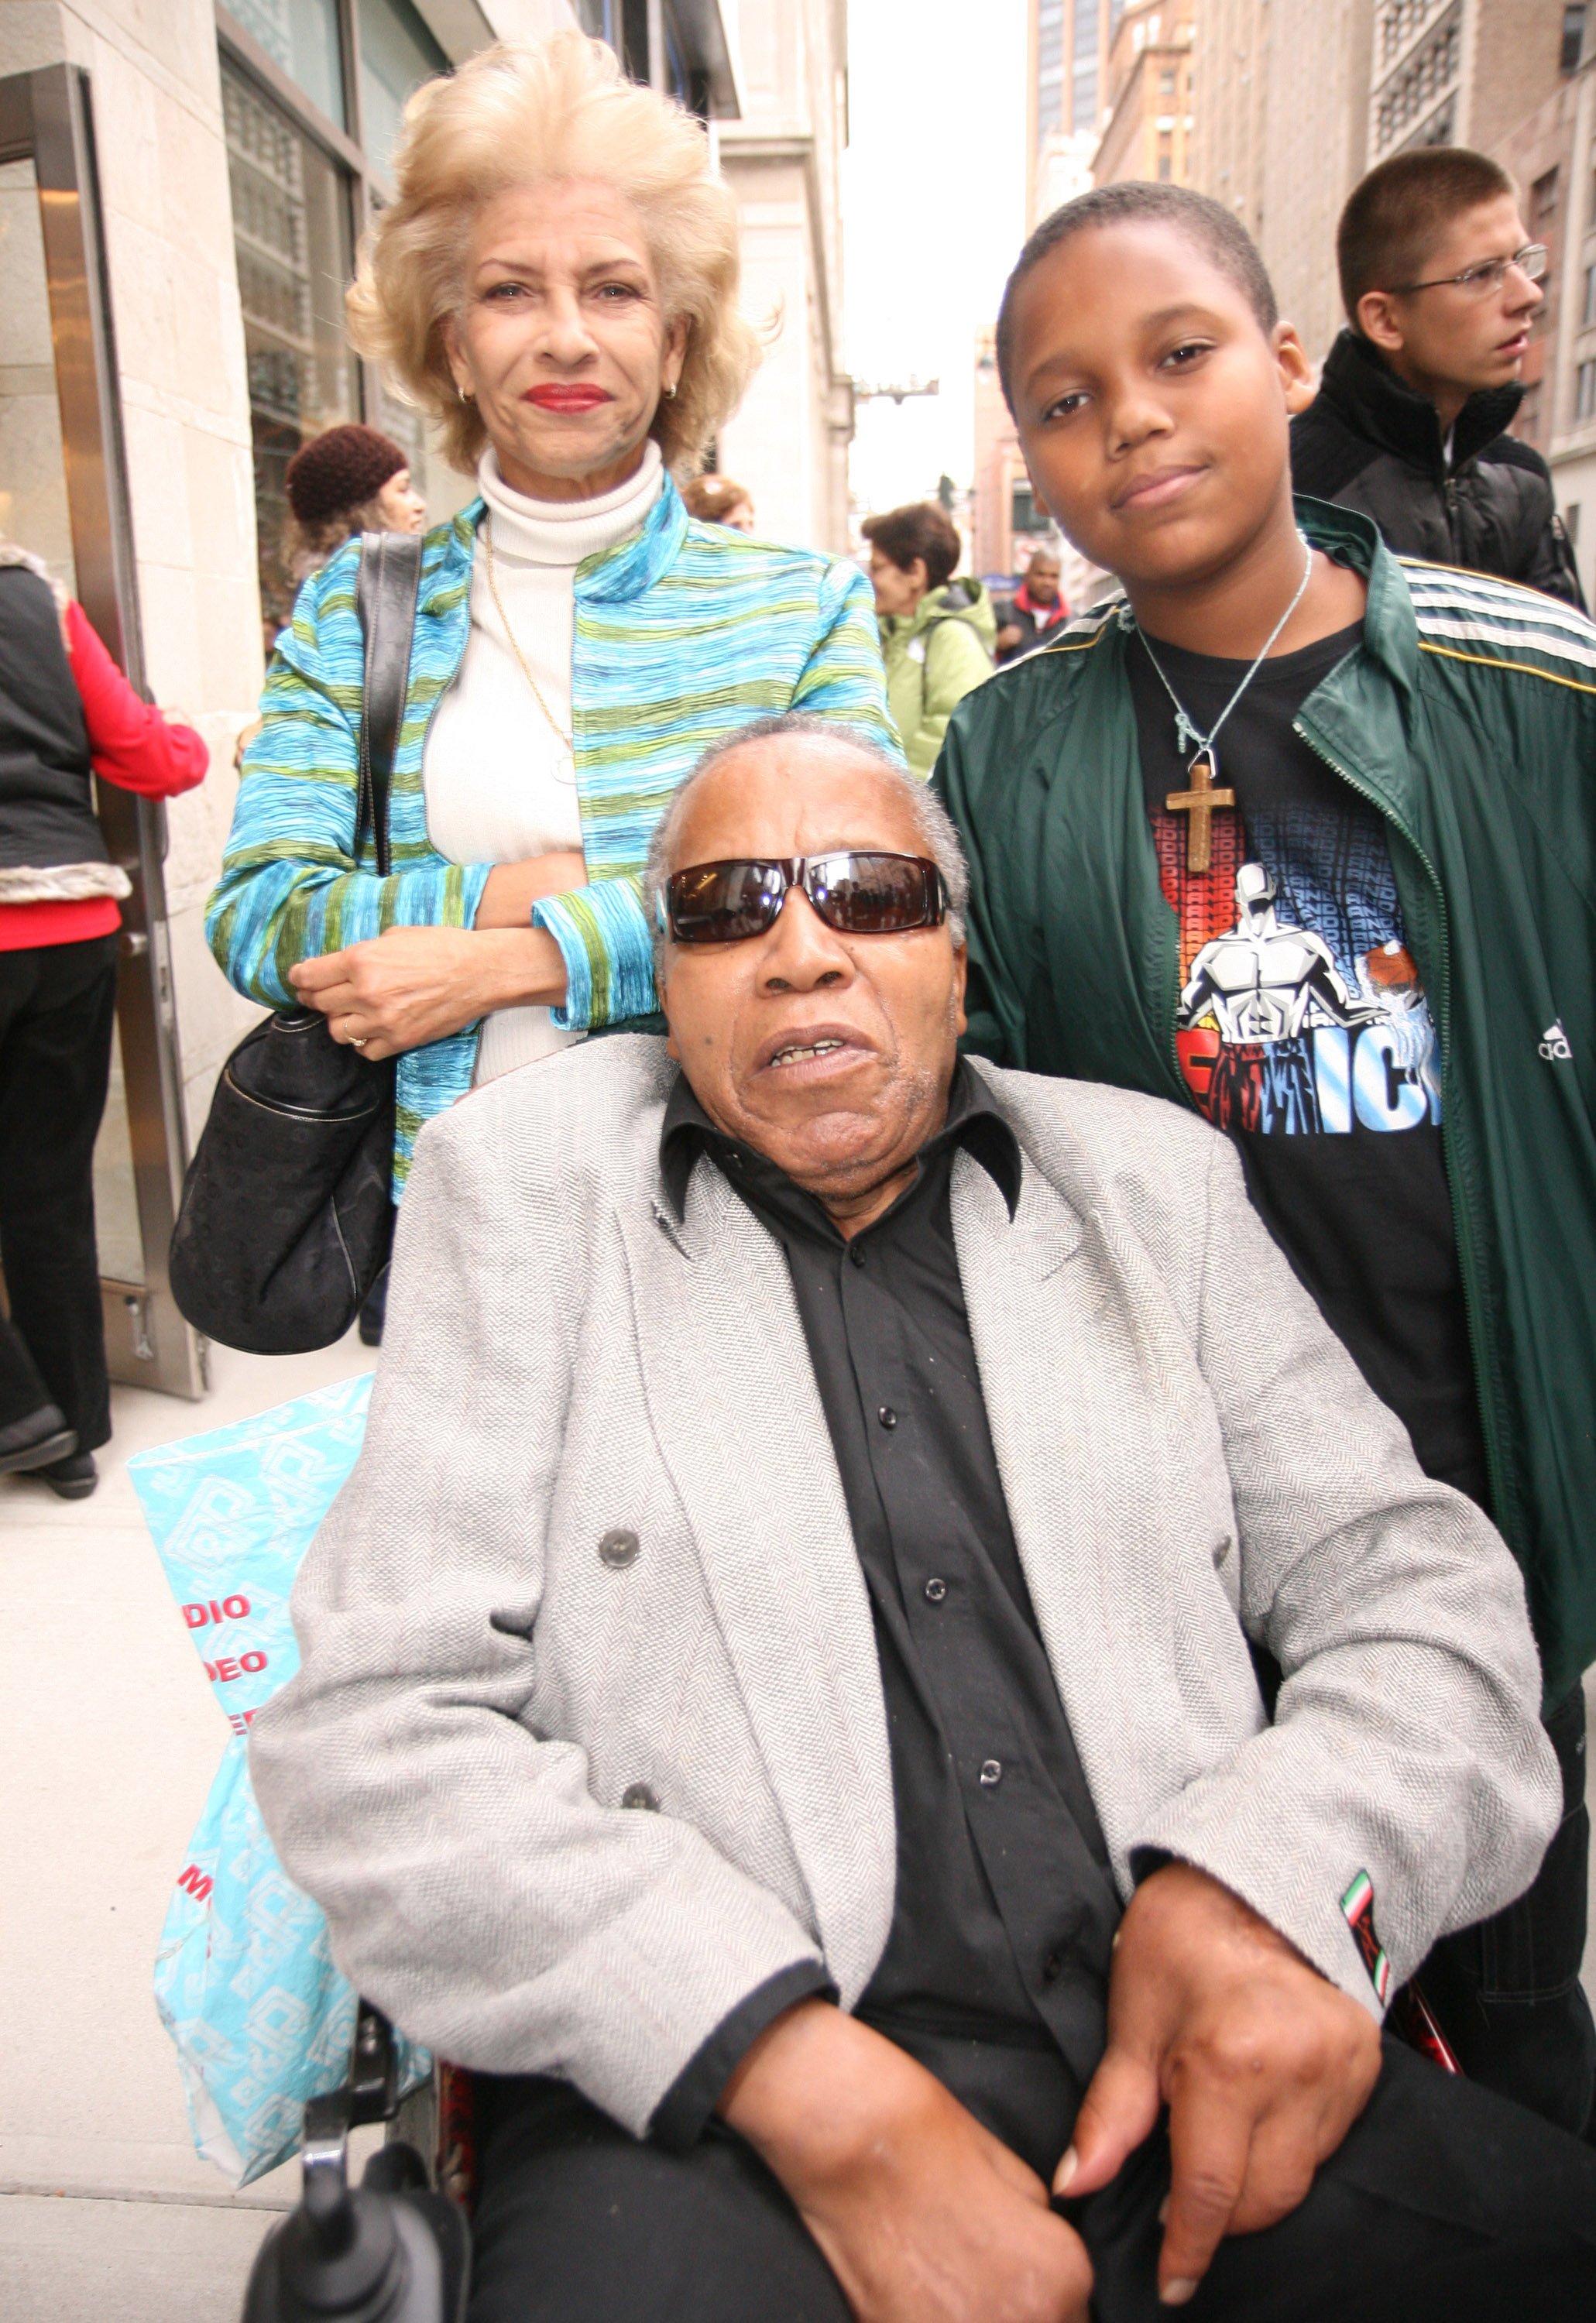 Frank Lucas, Julianna Farrait, and their son in New York on November 2, 2007. | Source: Getty Images